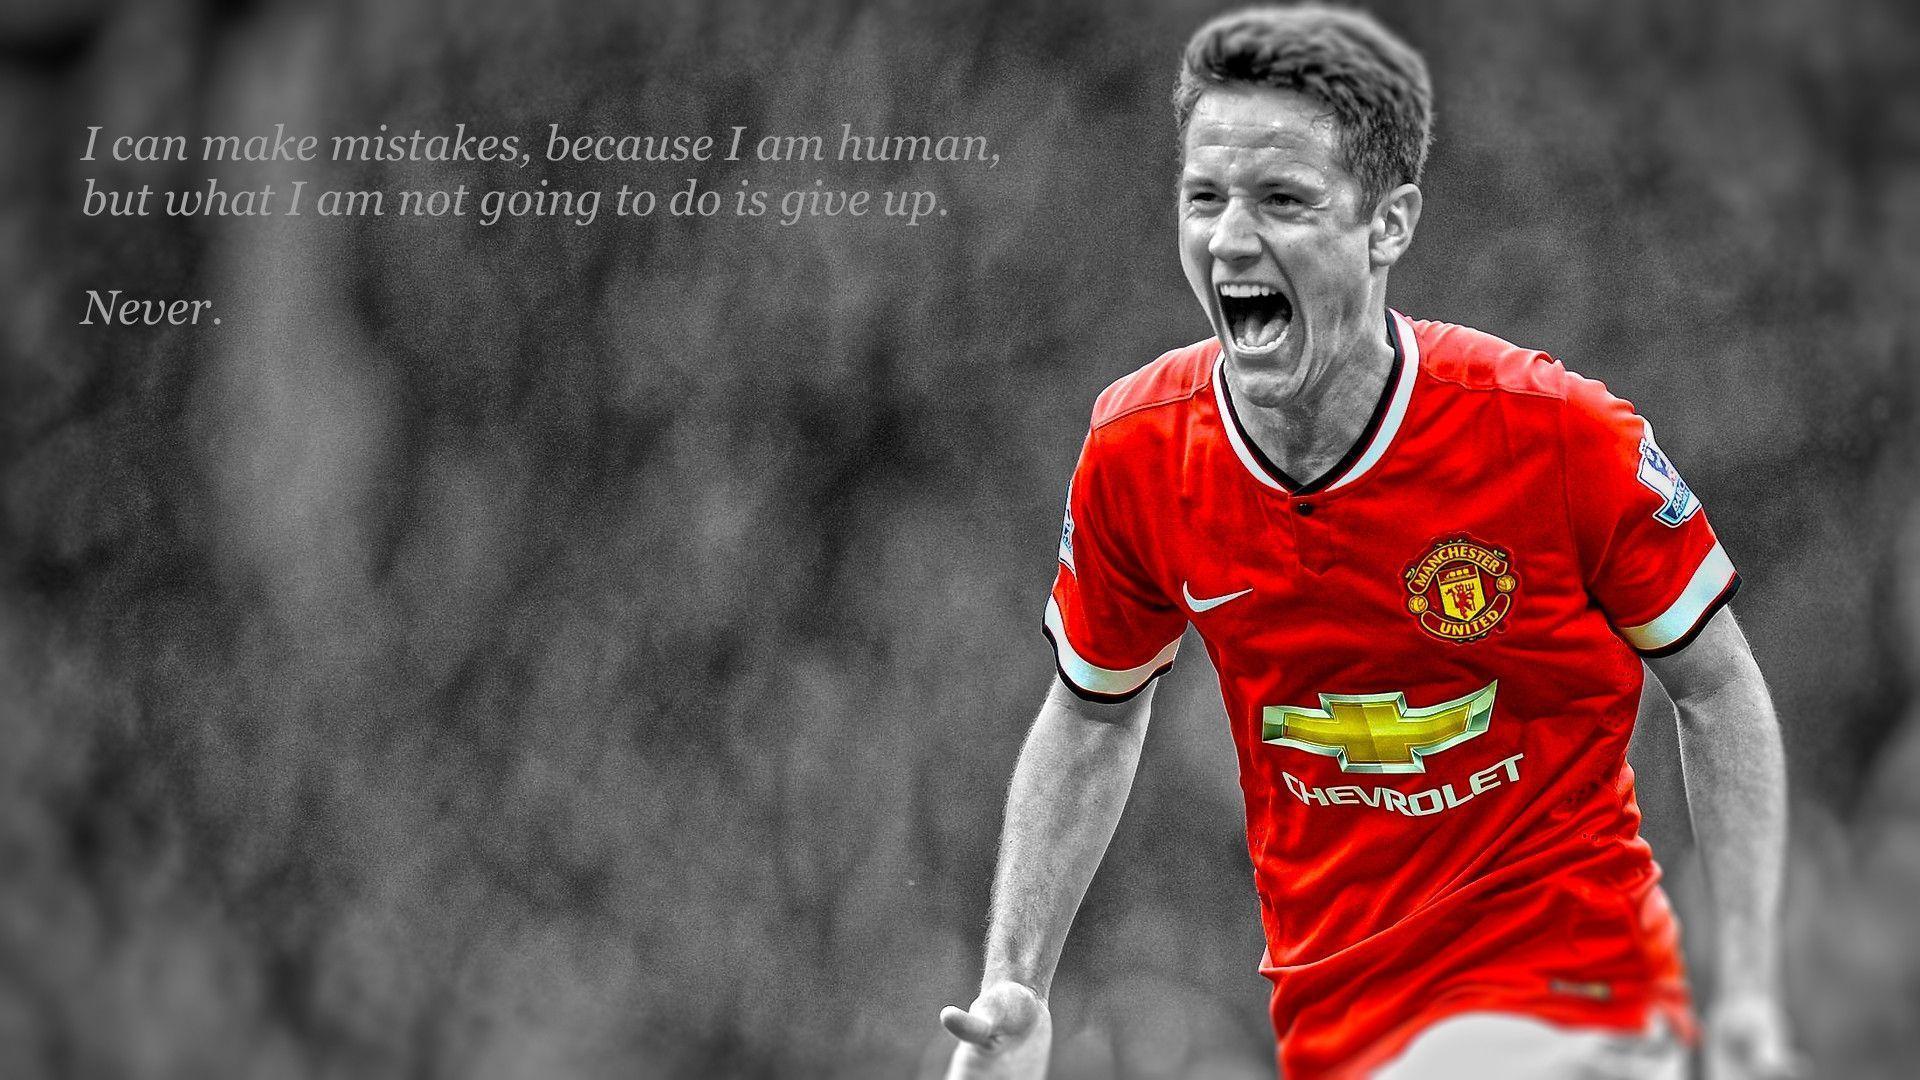 Request for a wall paper, with Ander Herrera and his quote